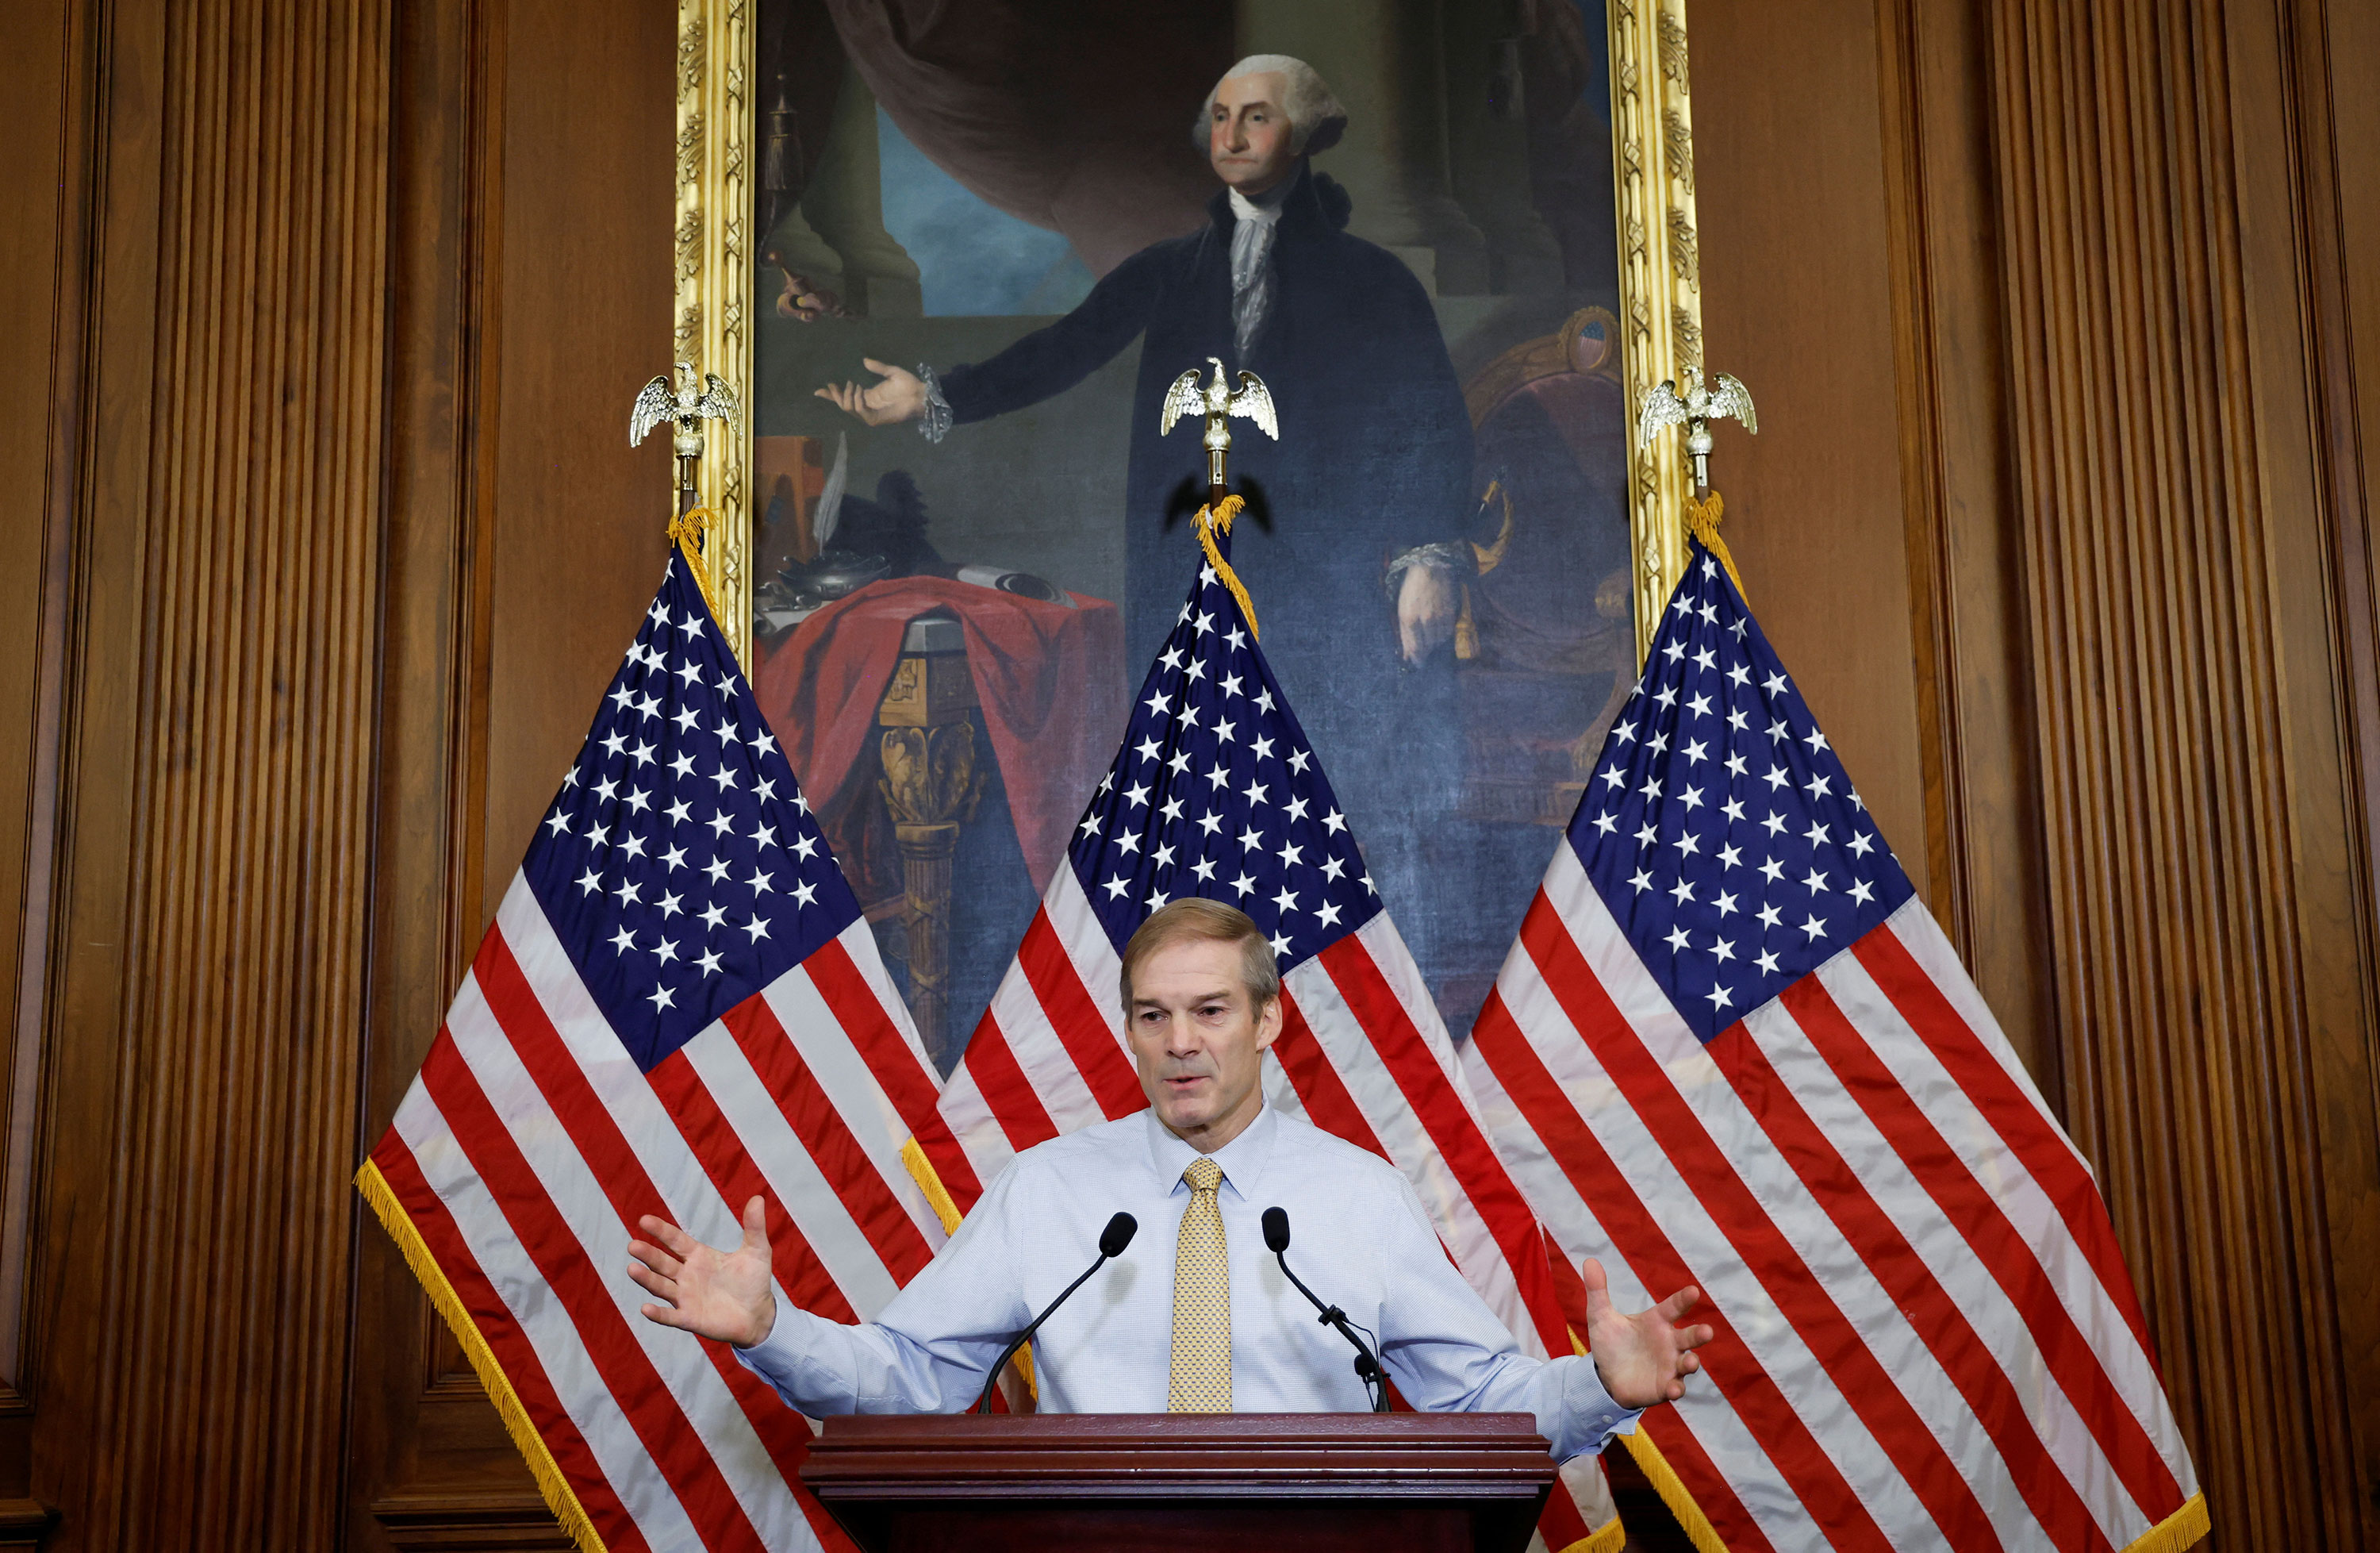 Rep. Jim Jordan speaks to the press at the Capitol in Washington on Friday.